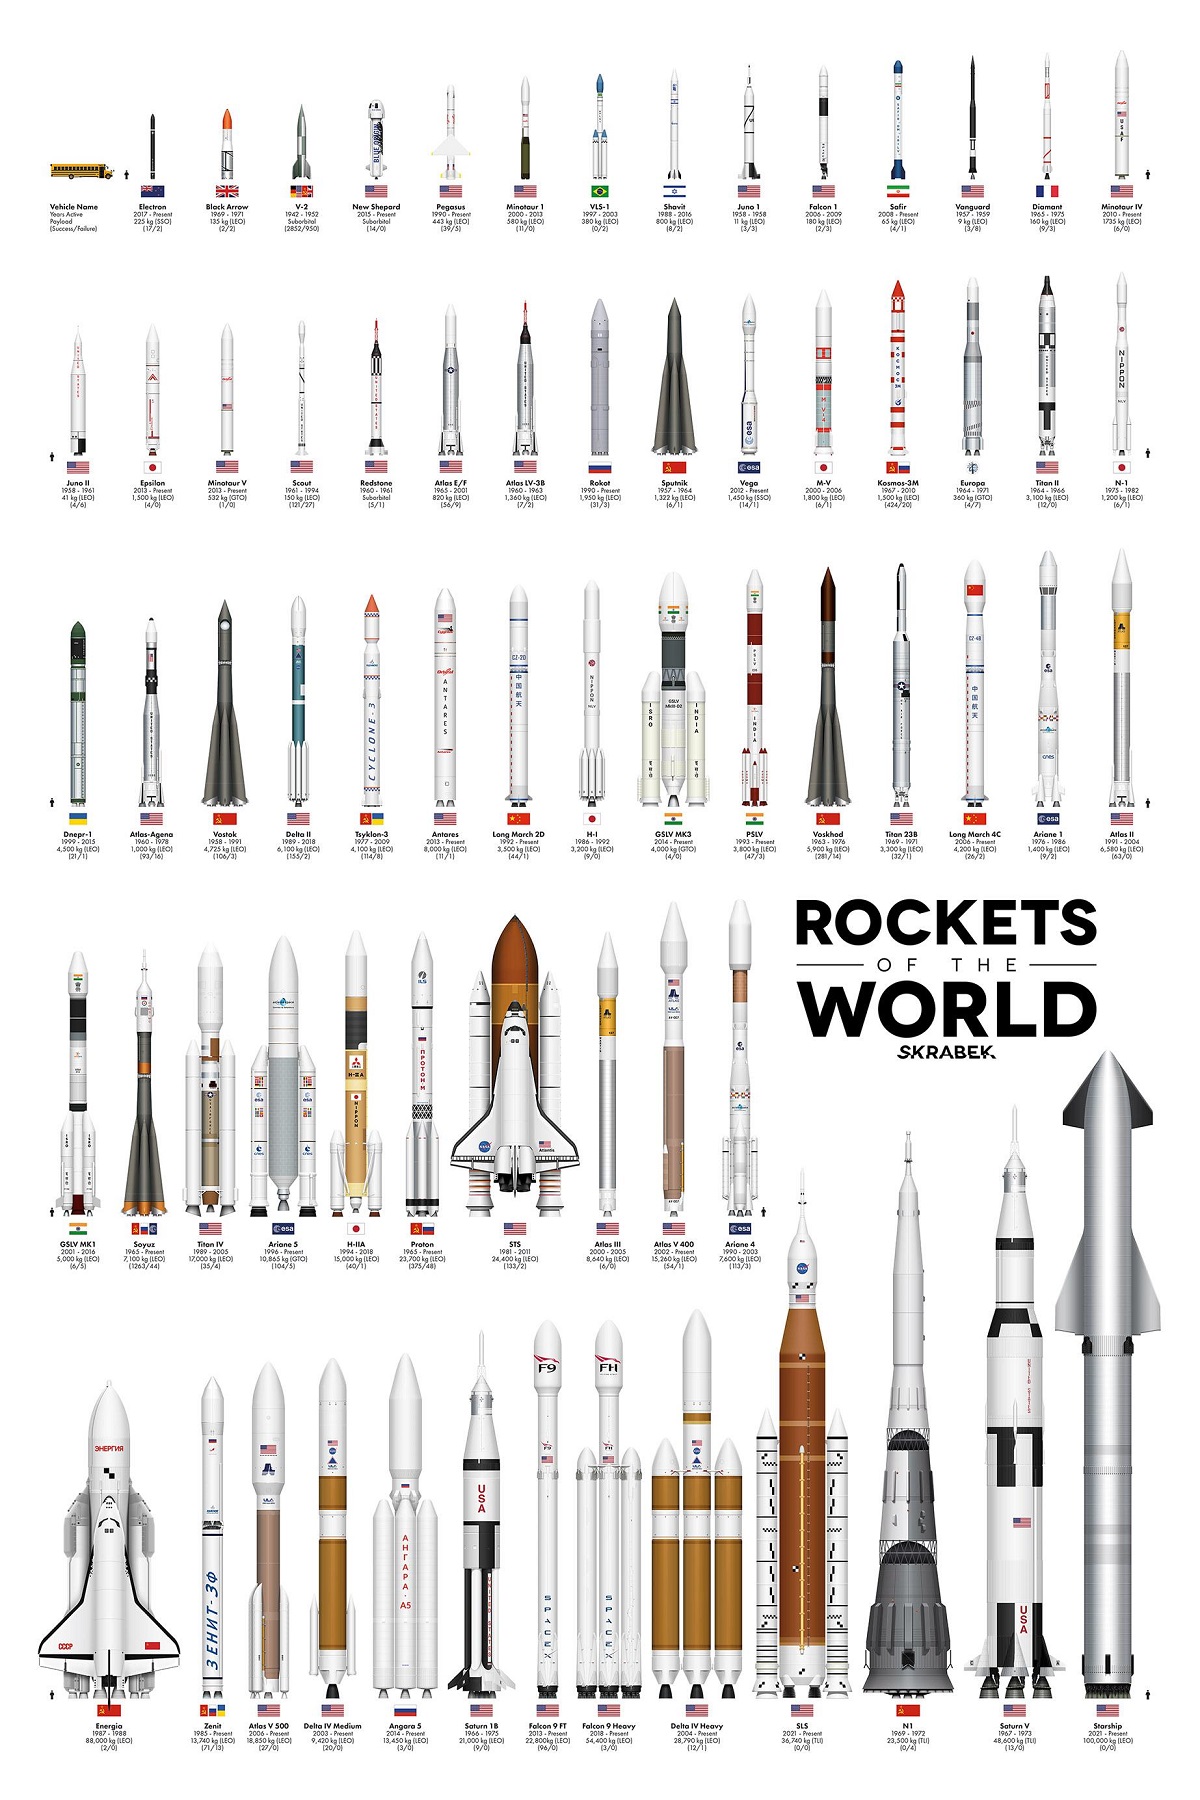 Comparing The Size Of The Worlds Rockets Past And Present